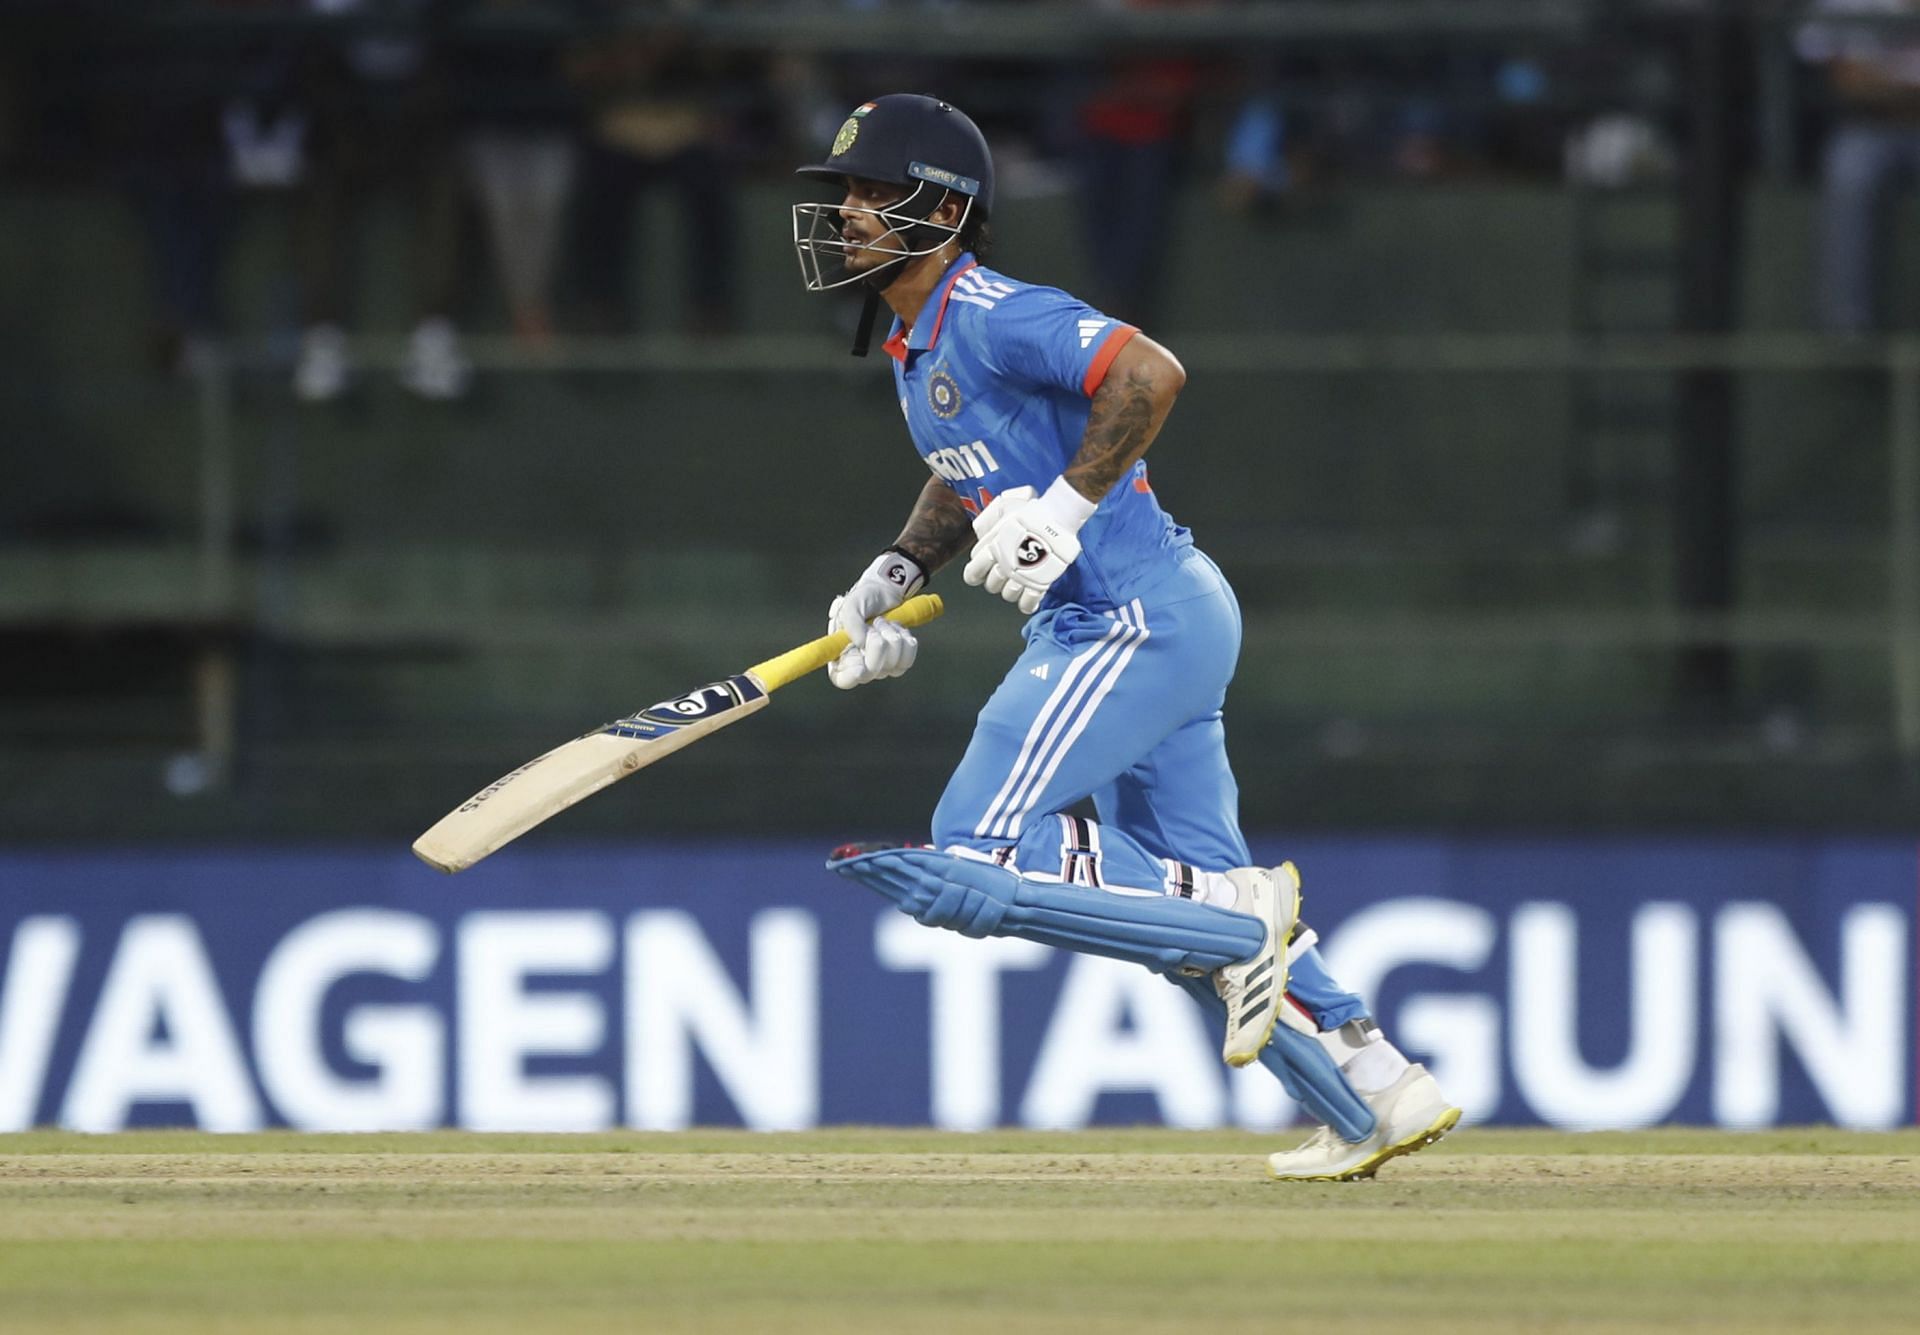 Ishan Kishan came good in a middle-order role against Pakistan